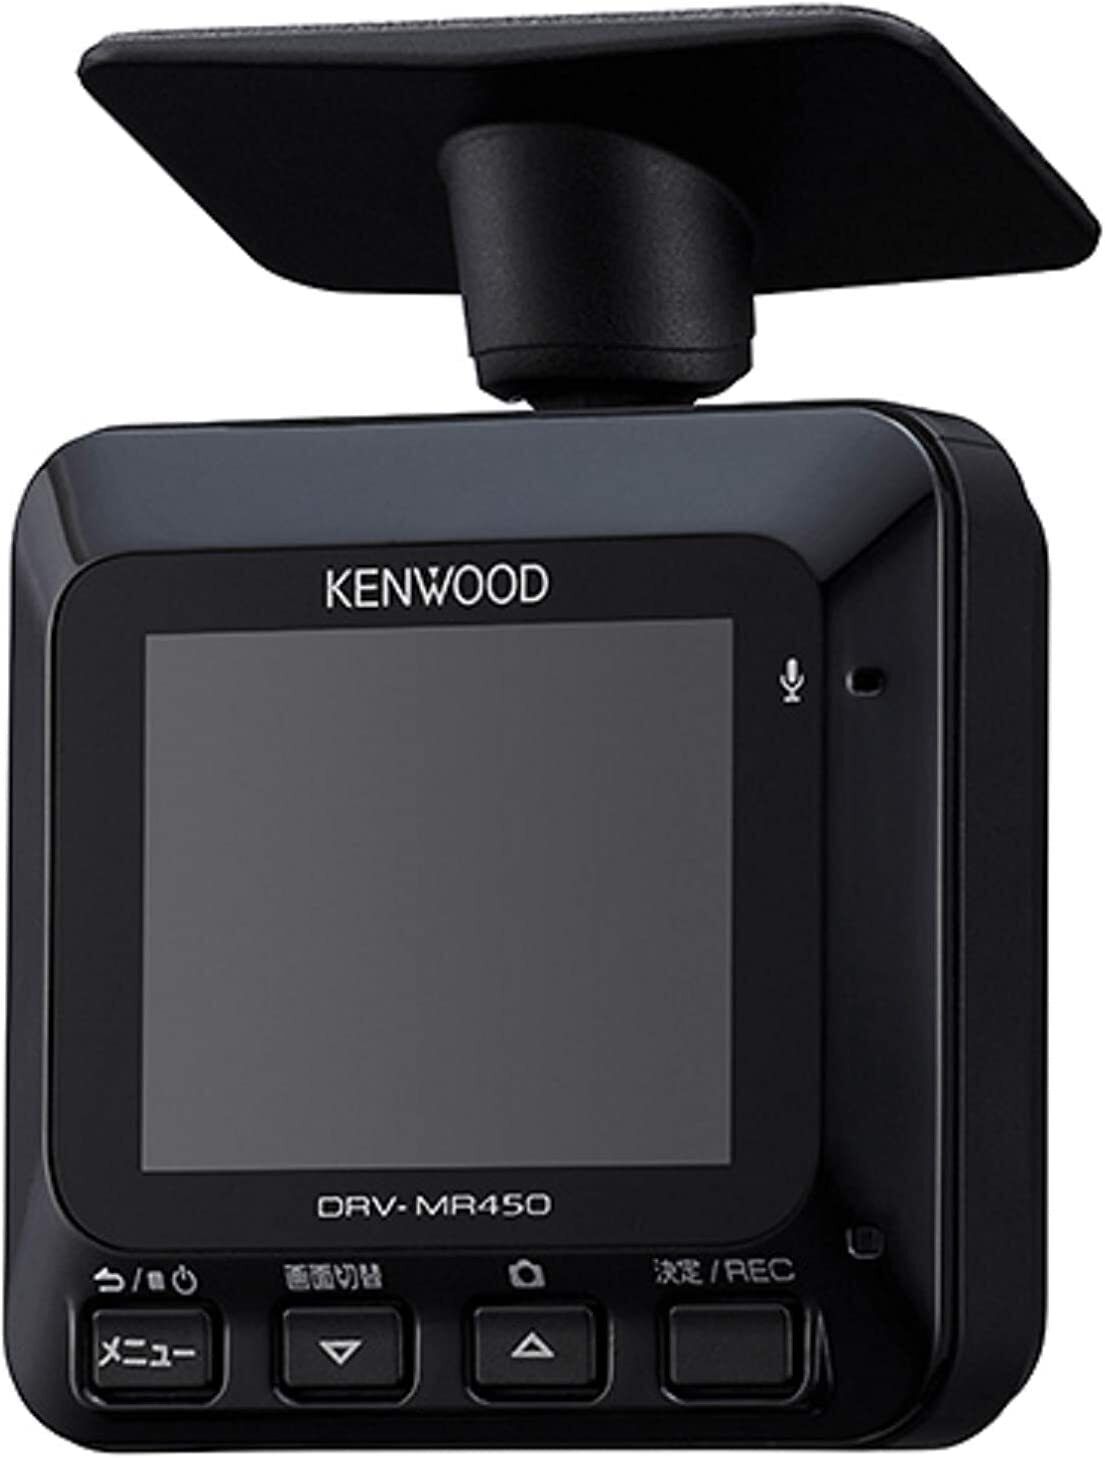 DRV-MR450 Kenwood 2 camera drive recorder for front and rear shooting Japan New